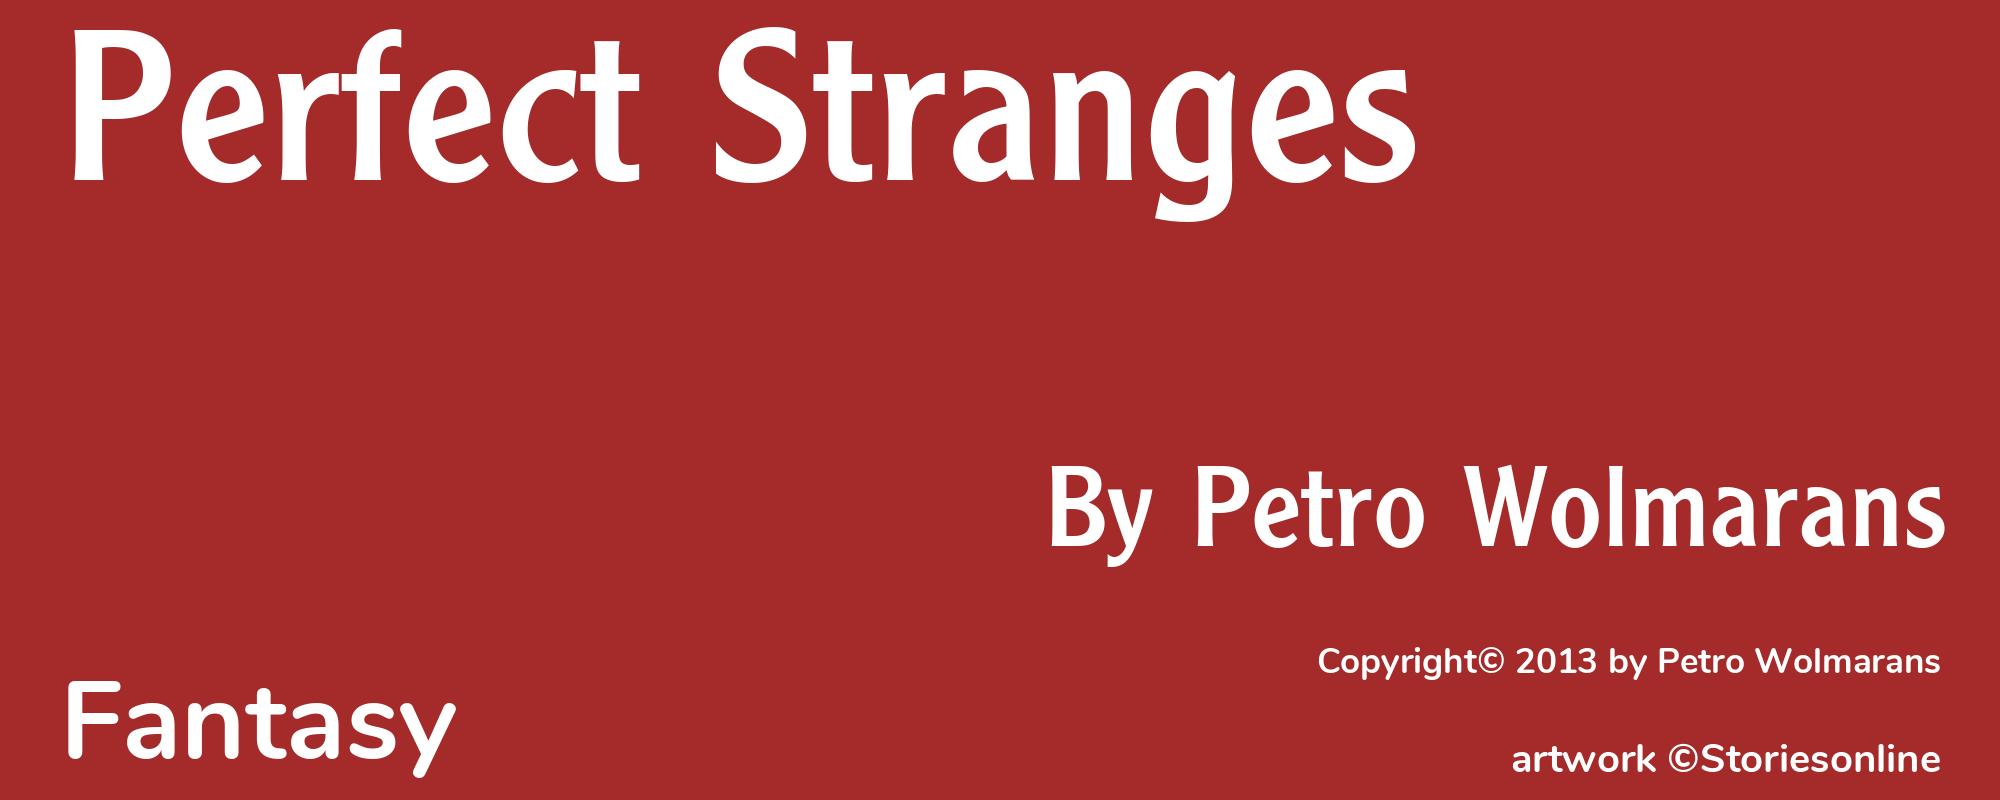 Perfect Stranges - Cover